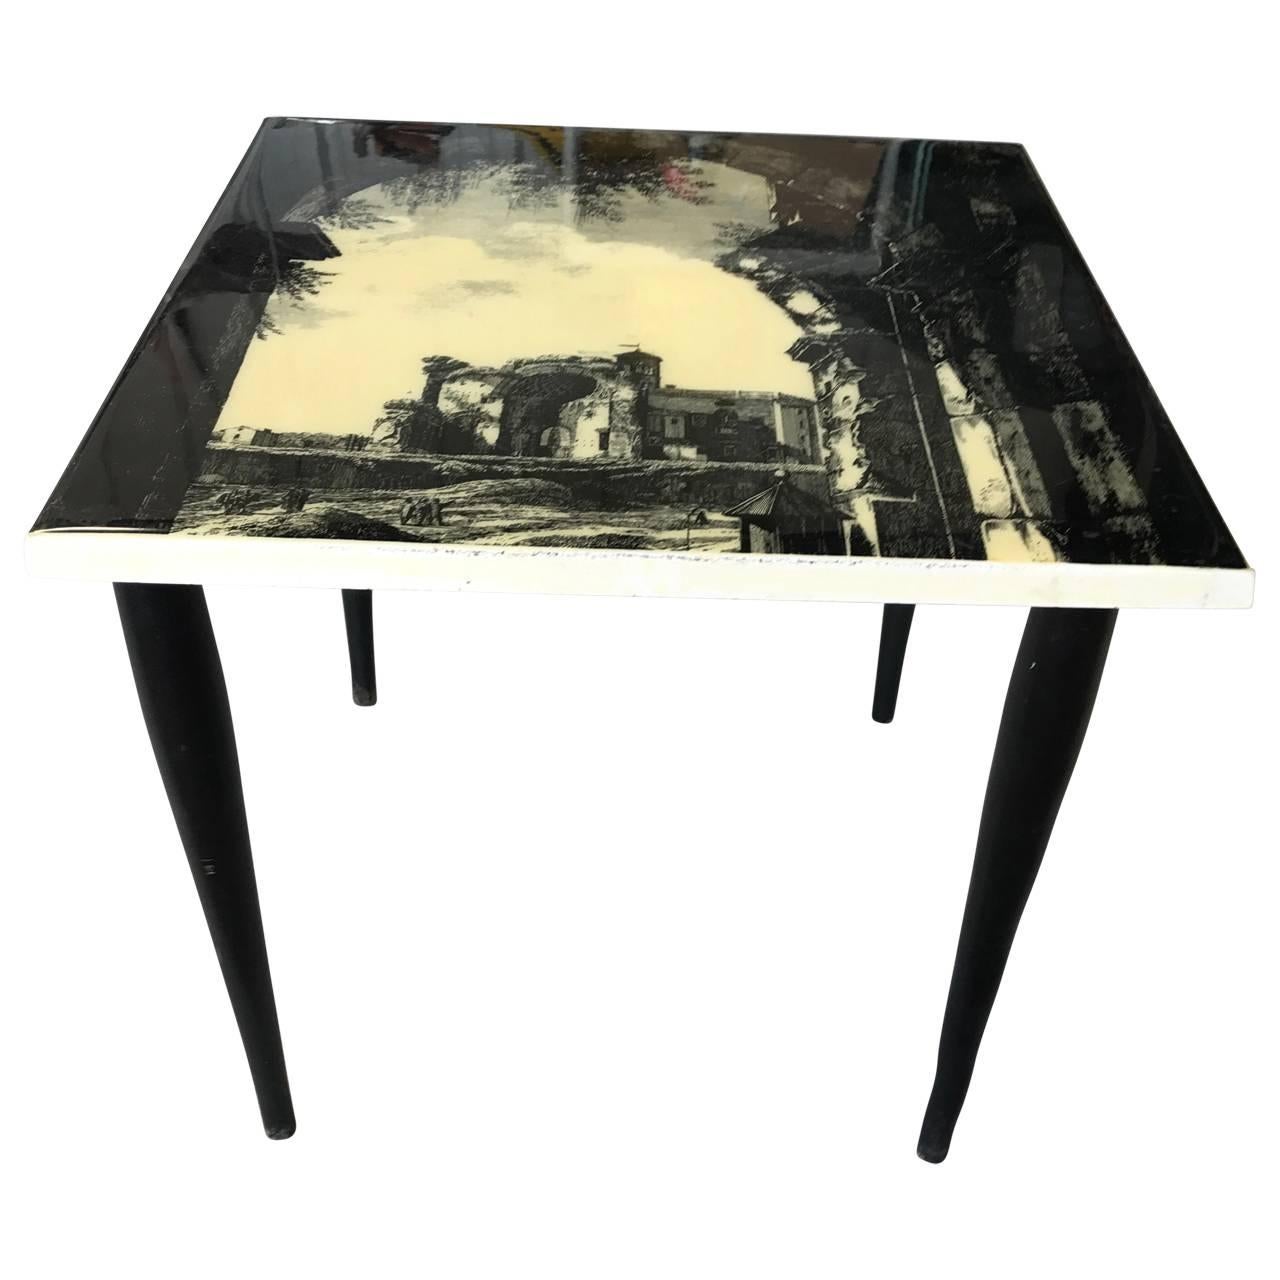 Fornasetti style Mid-Century Modern side table. This petite Italian end table bears a lovely lithographed laminated scene of a rural Italian countryside. The table has beautiful classical Italian Mid-Century Modern styling; black legs, white trim